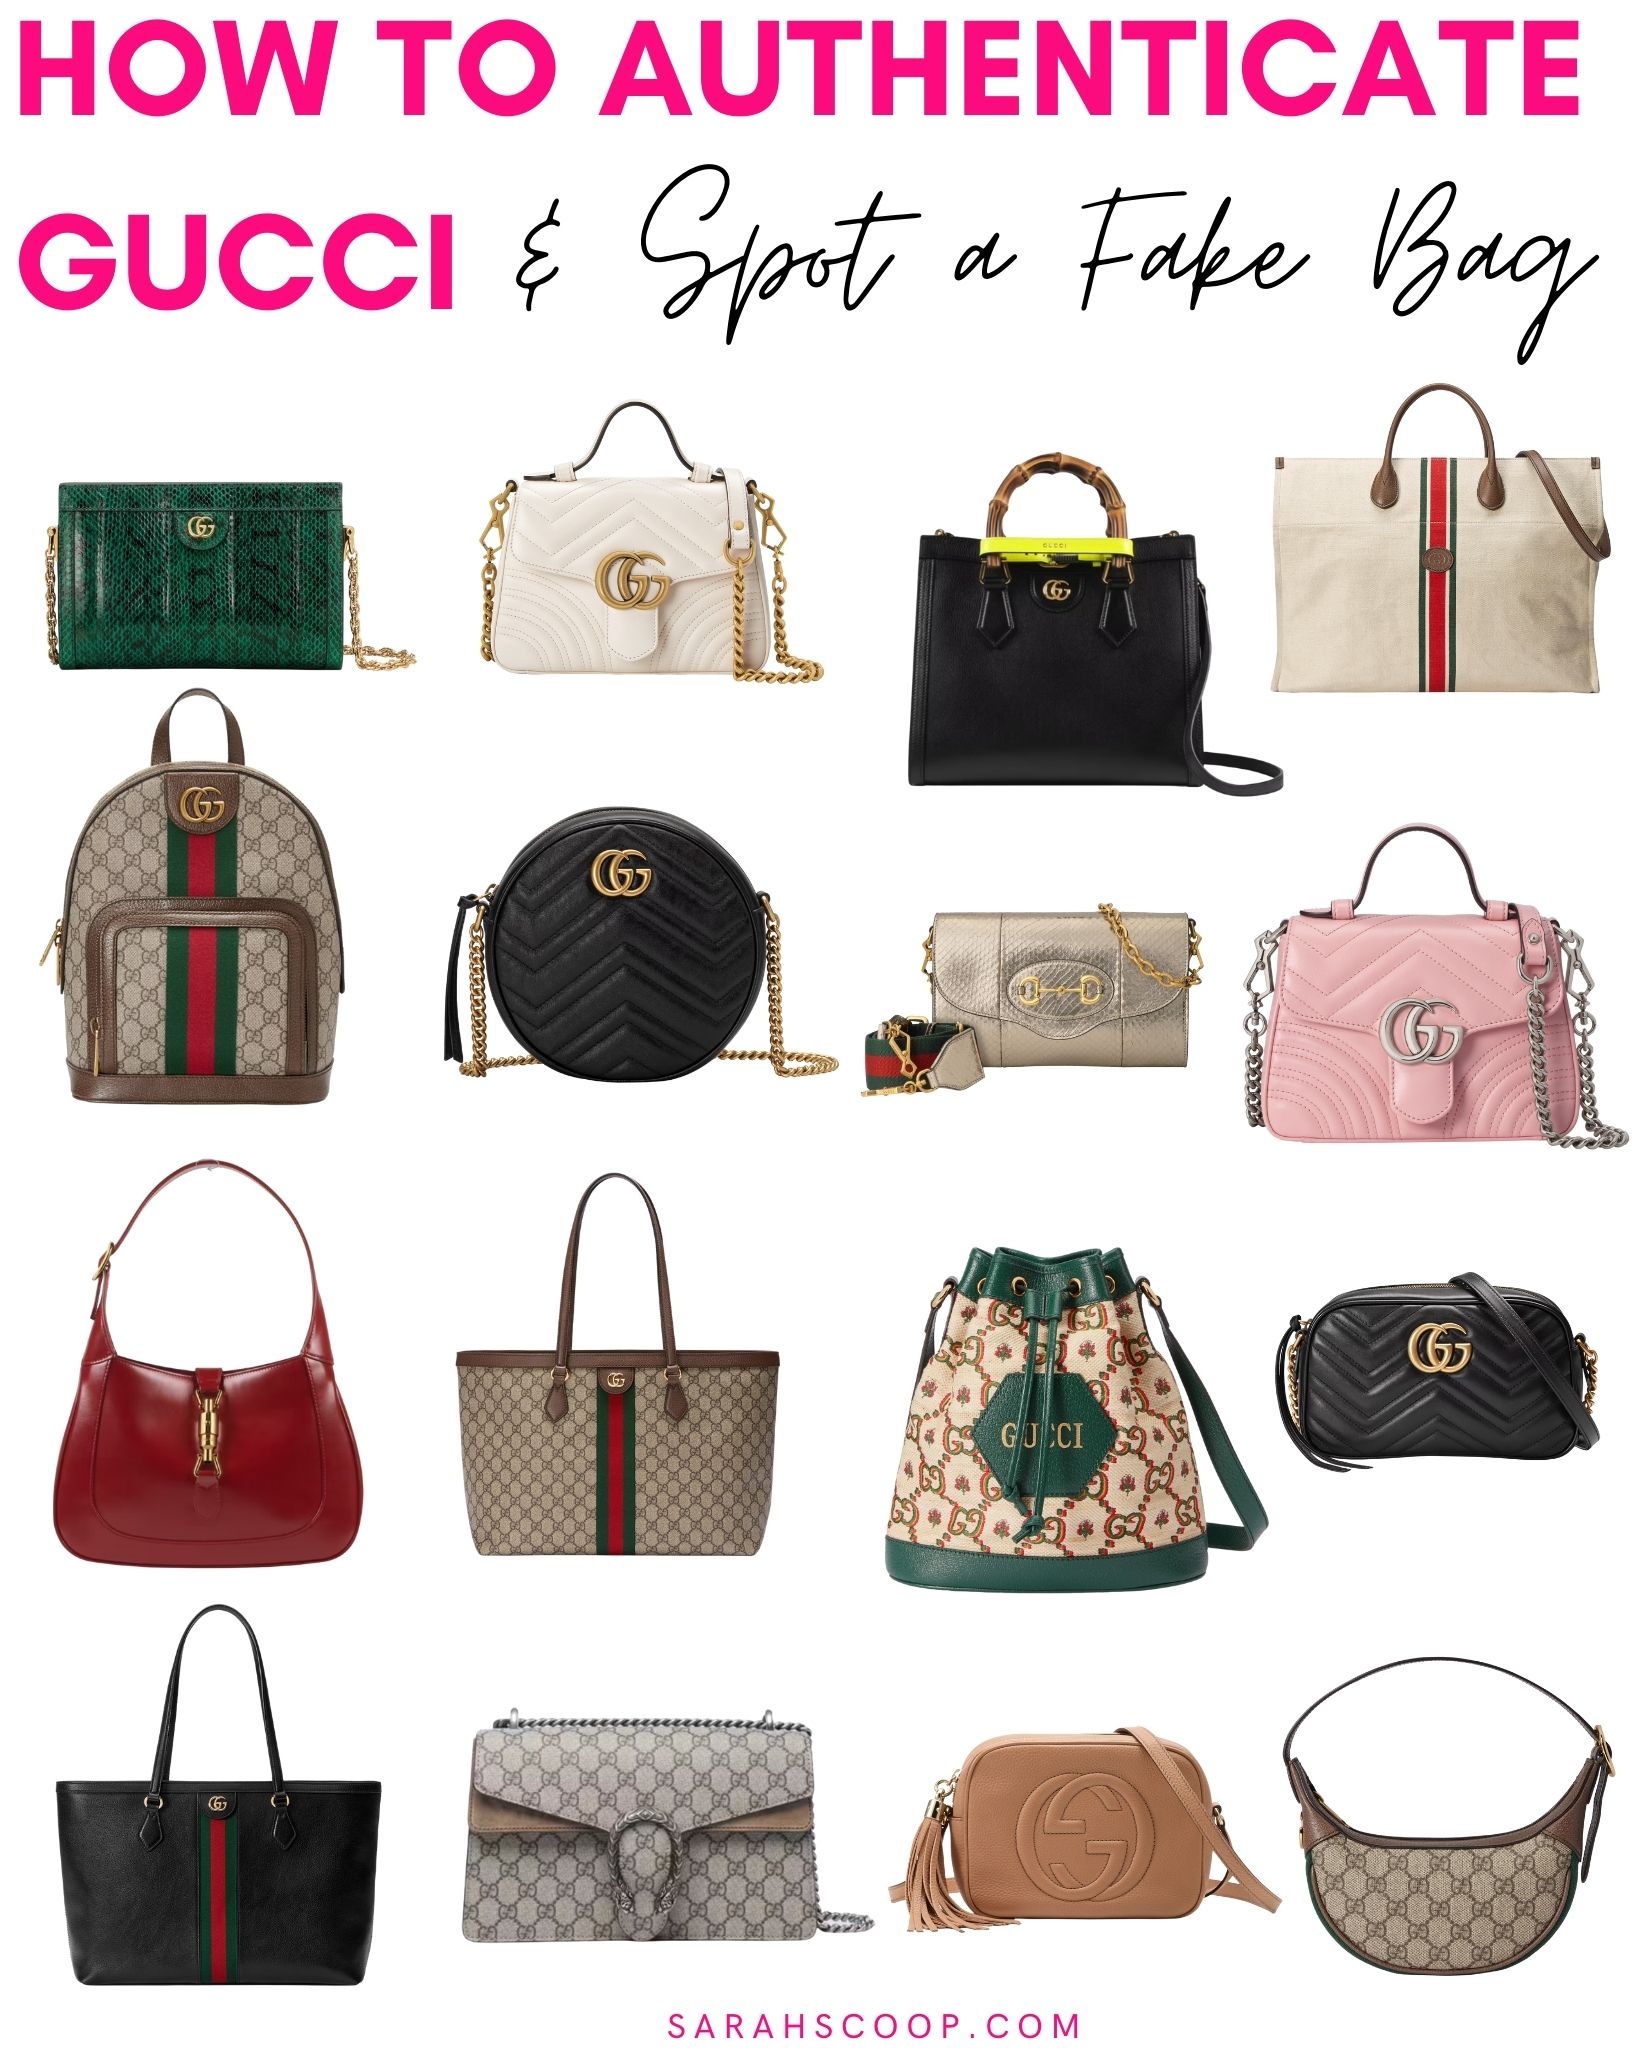 How To Tell If A Gucci Bag Is Fake vs. Real | Sarah Scoop